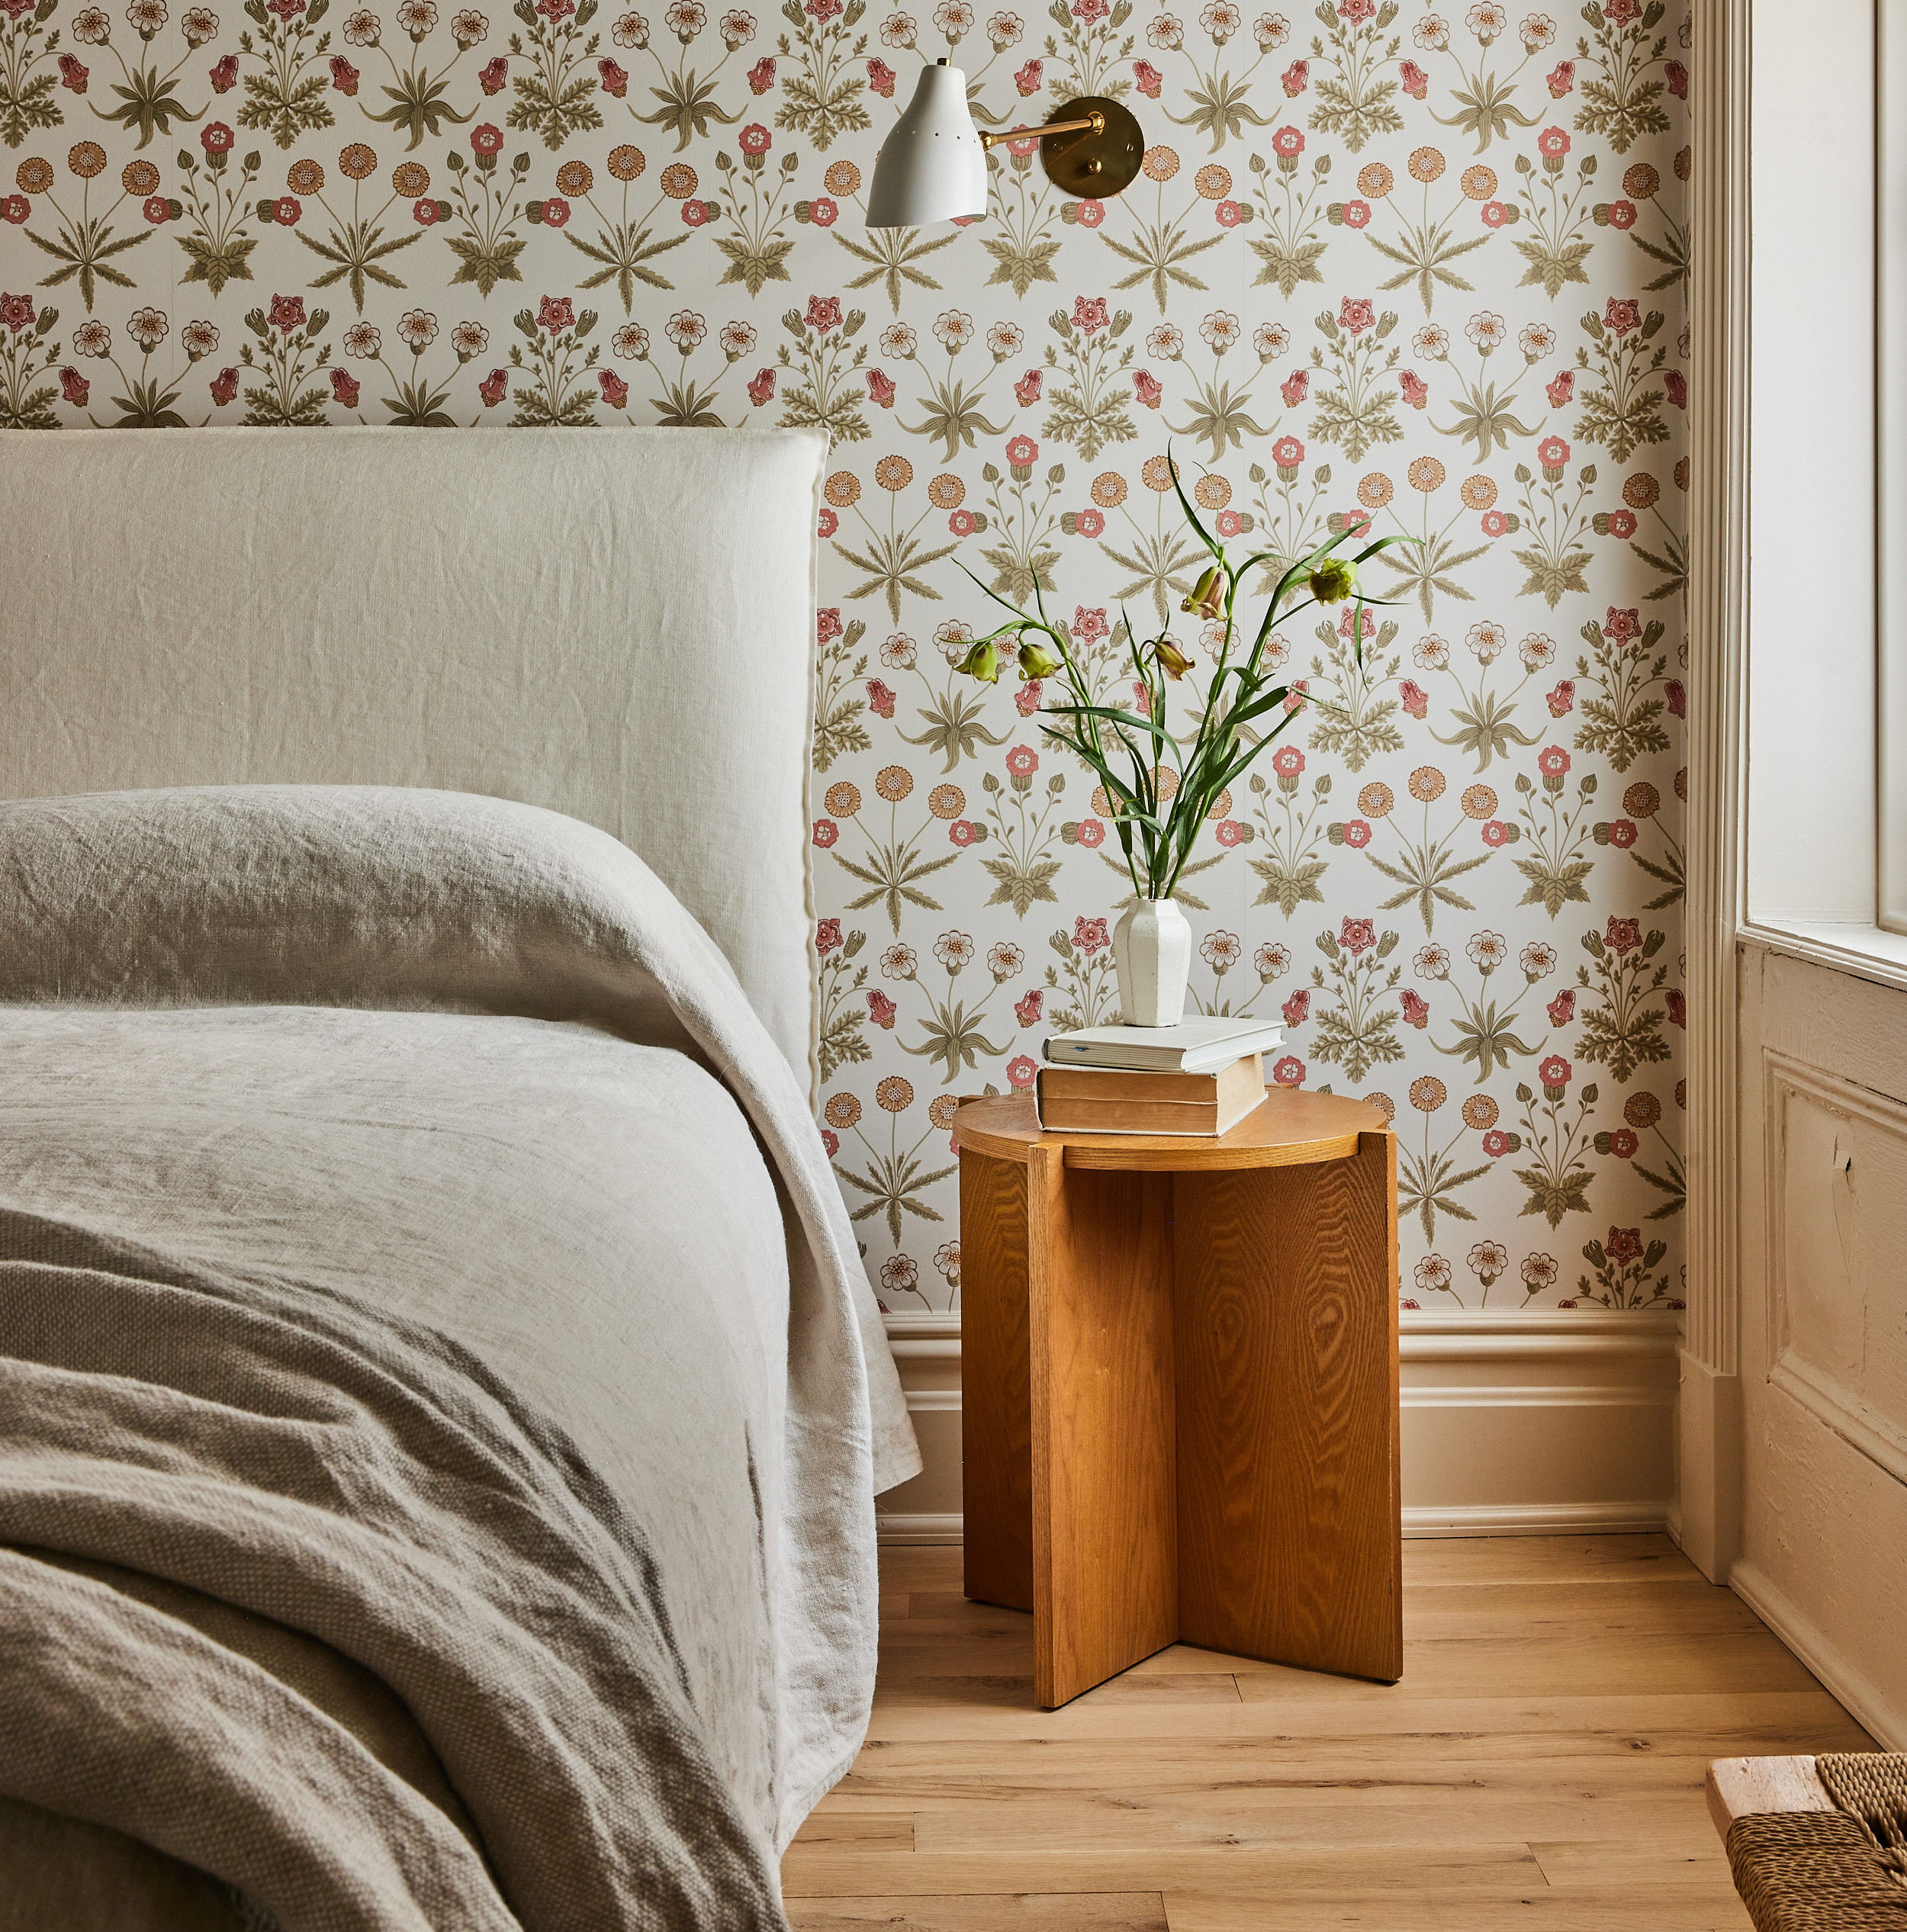 a bedroom with a bed, nightstand, and flower wallpaper